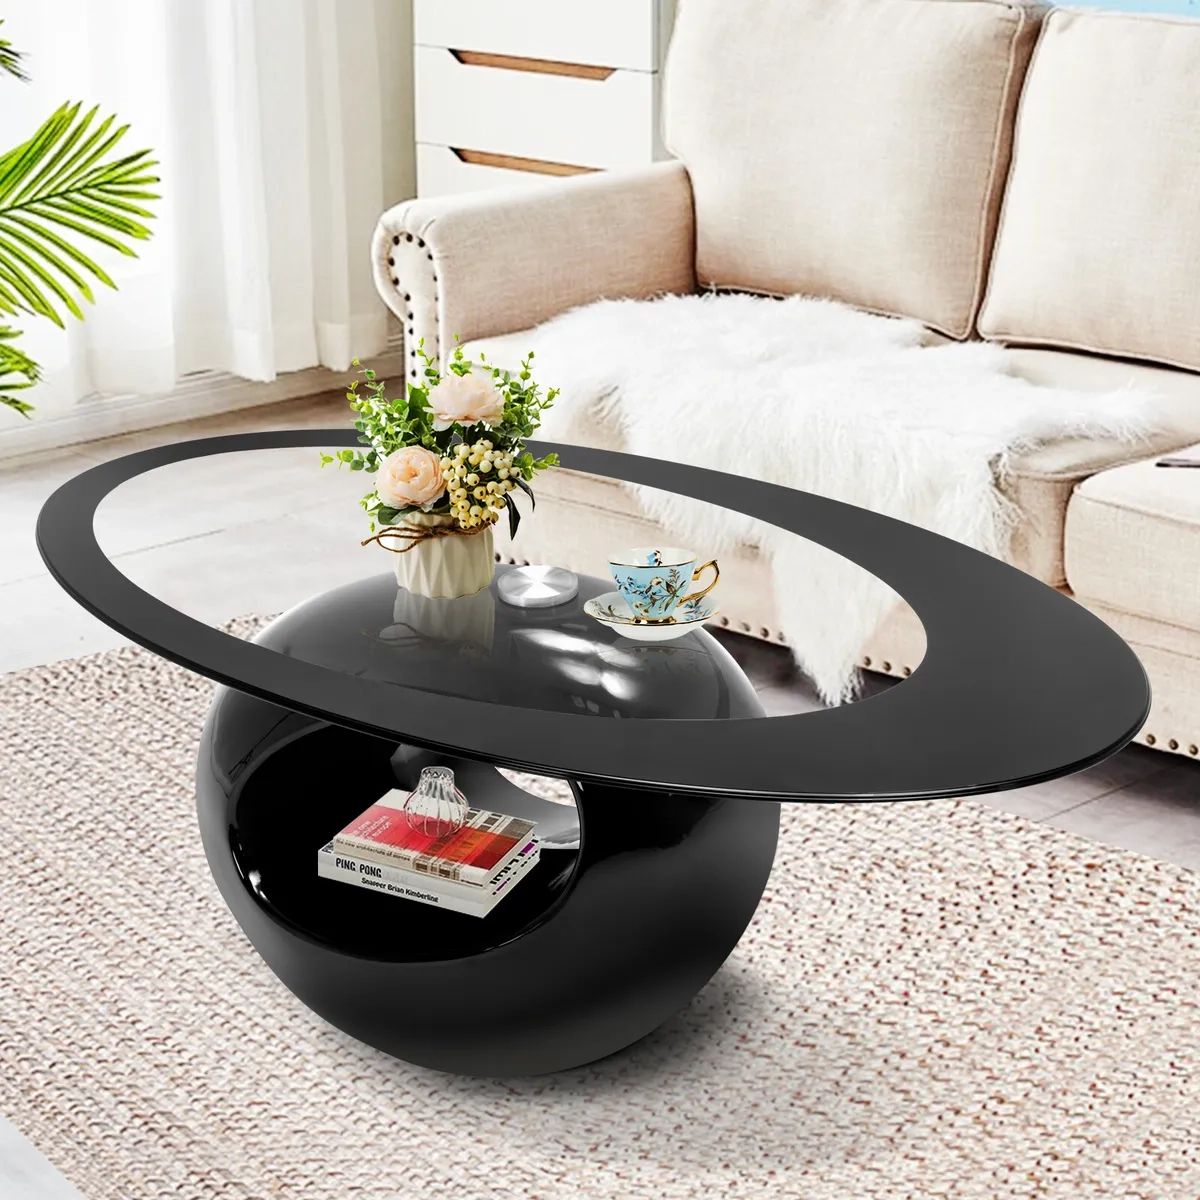 Minimalistic Black High Gloss Oval Glass Coffee Table Hollow Storage Living  Room | Ebay For Oval Glass Coffee Tables (View 6 of 15)